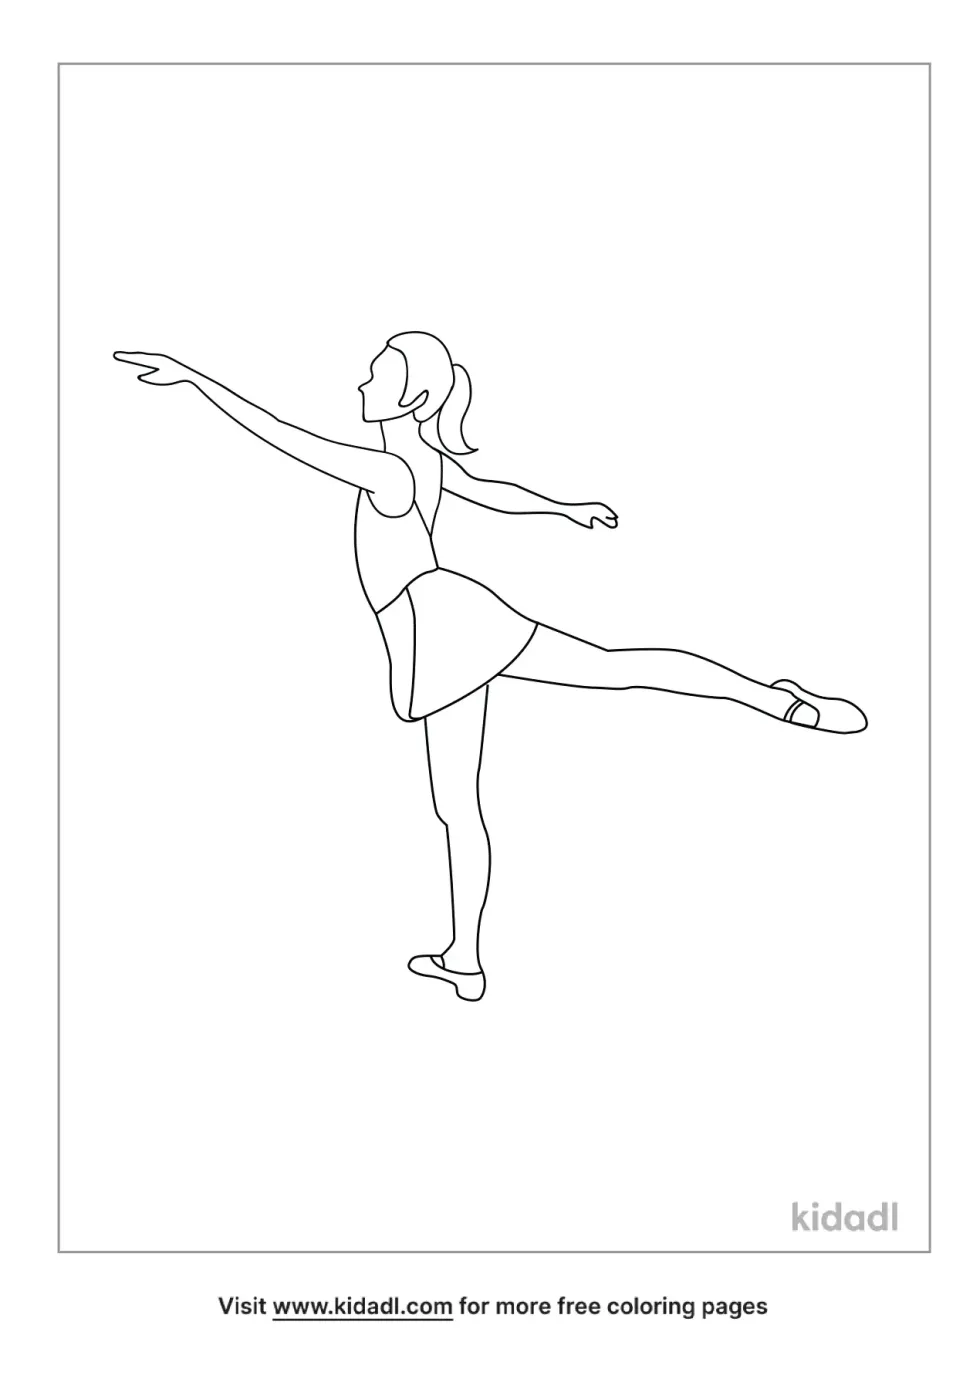 Arabesque Coloring Page